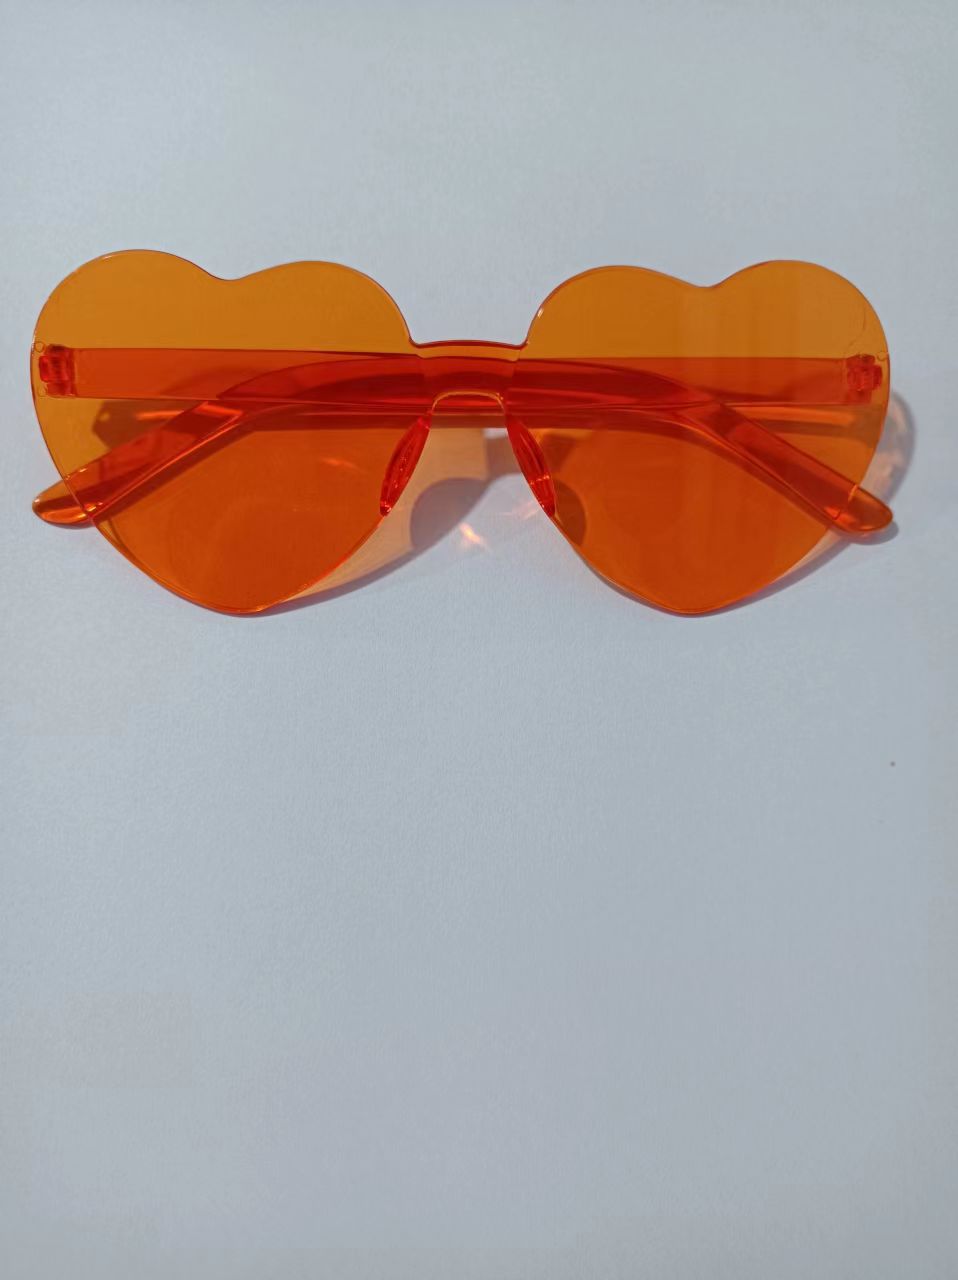 Peach Heart Sunglasses Love Sunglasses Jelly Color Frameless Heart-Shaped One-Piece Glasses Dazzling Color Glasses